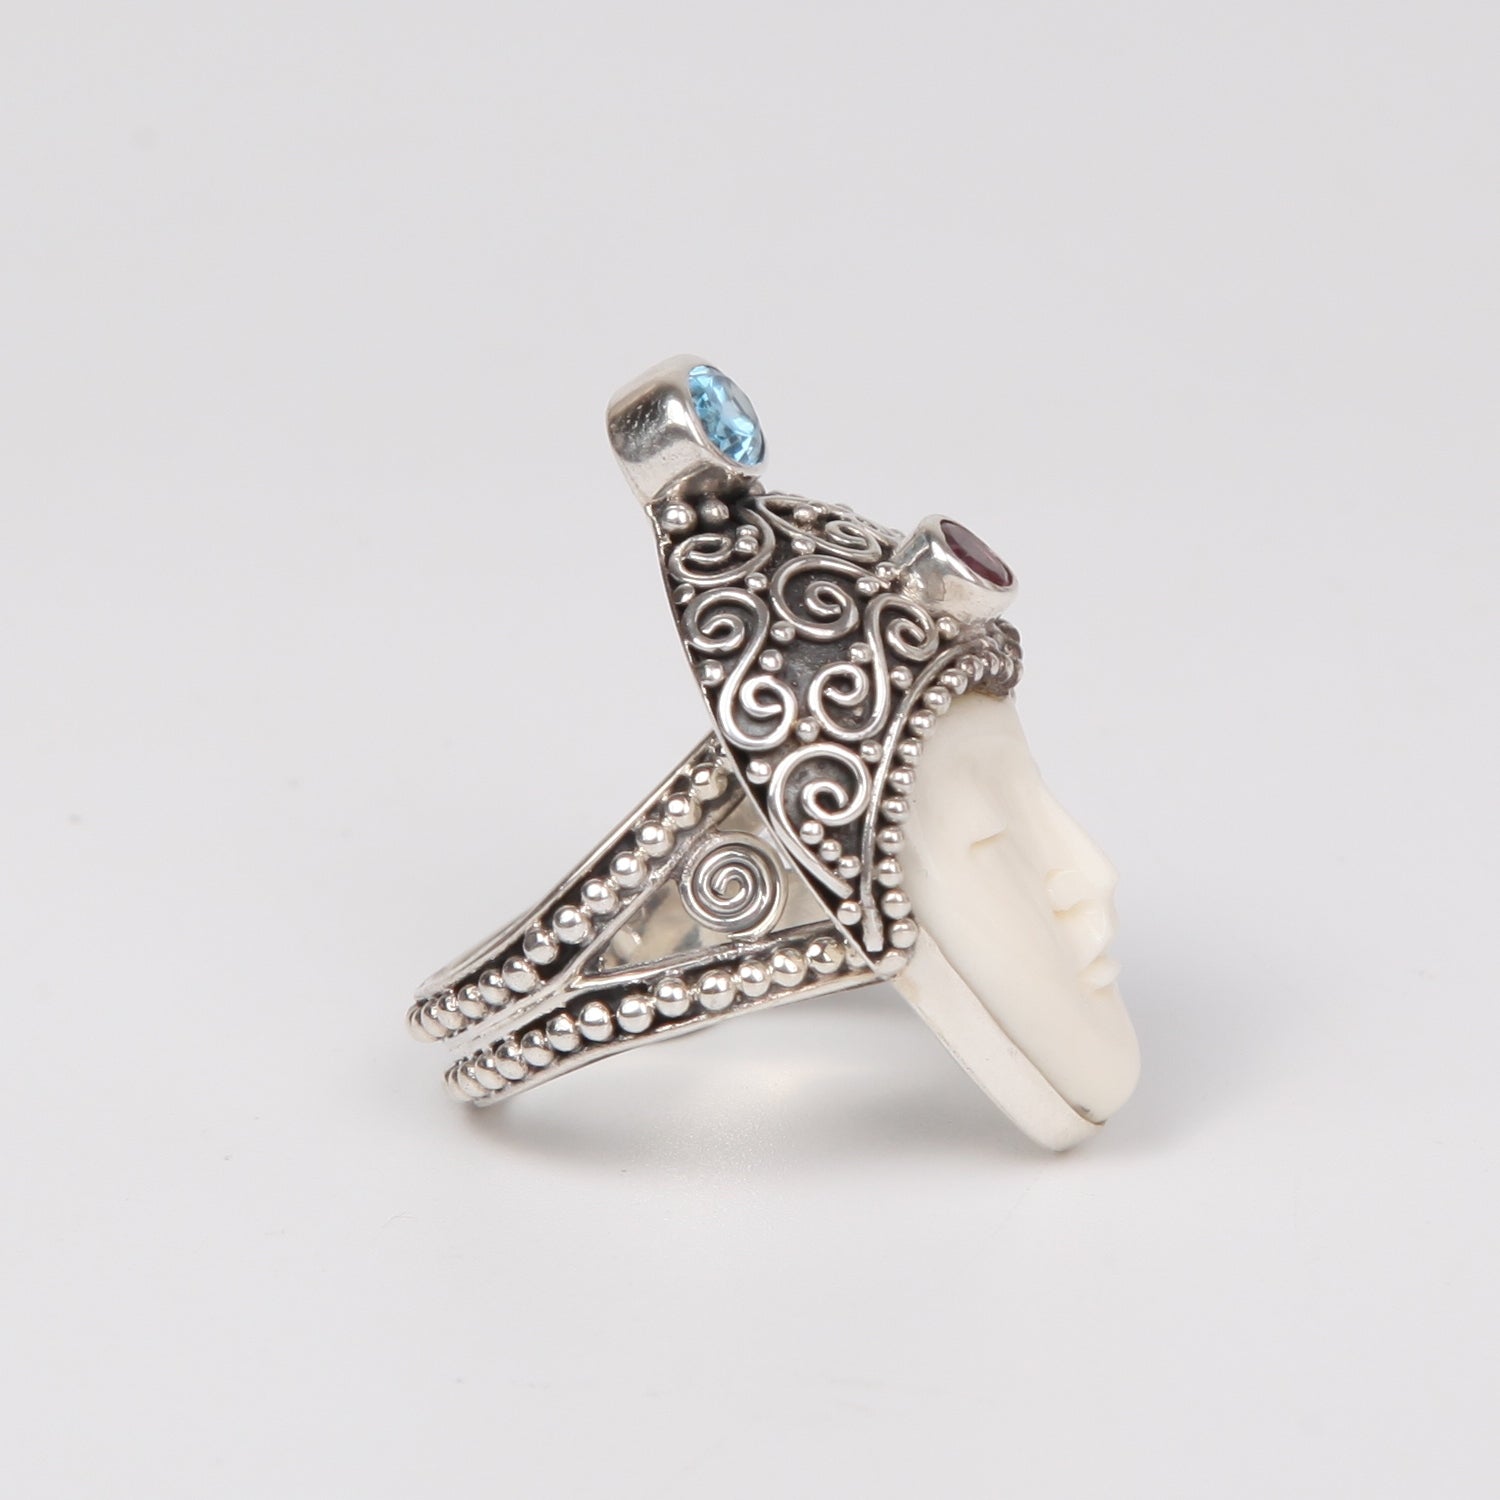 Buffalo Bone( Moon face) Sterling Silver Ring with Blue Topaz and Garnet